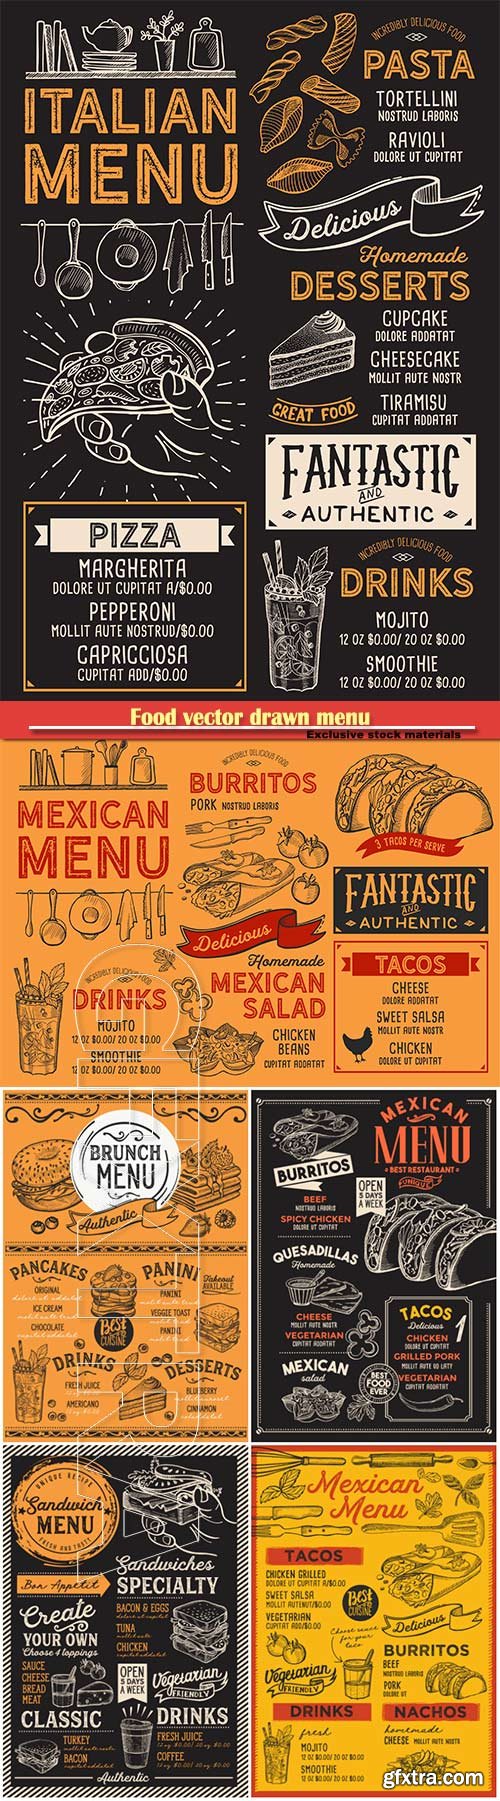 Food vector drawn menu, fast food, ice cream, cocktails, desserts, mexican food